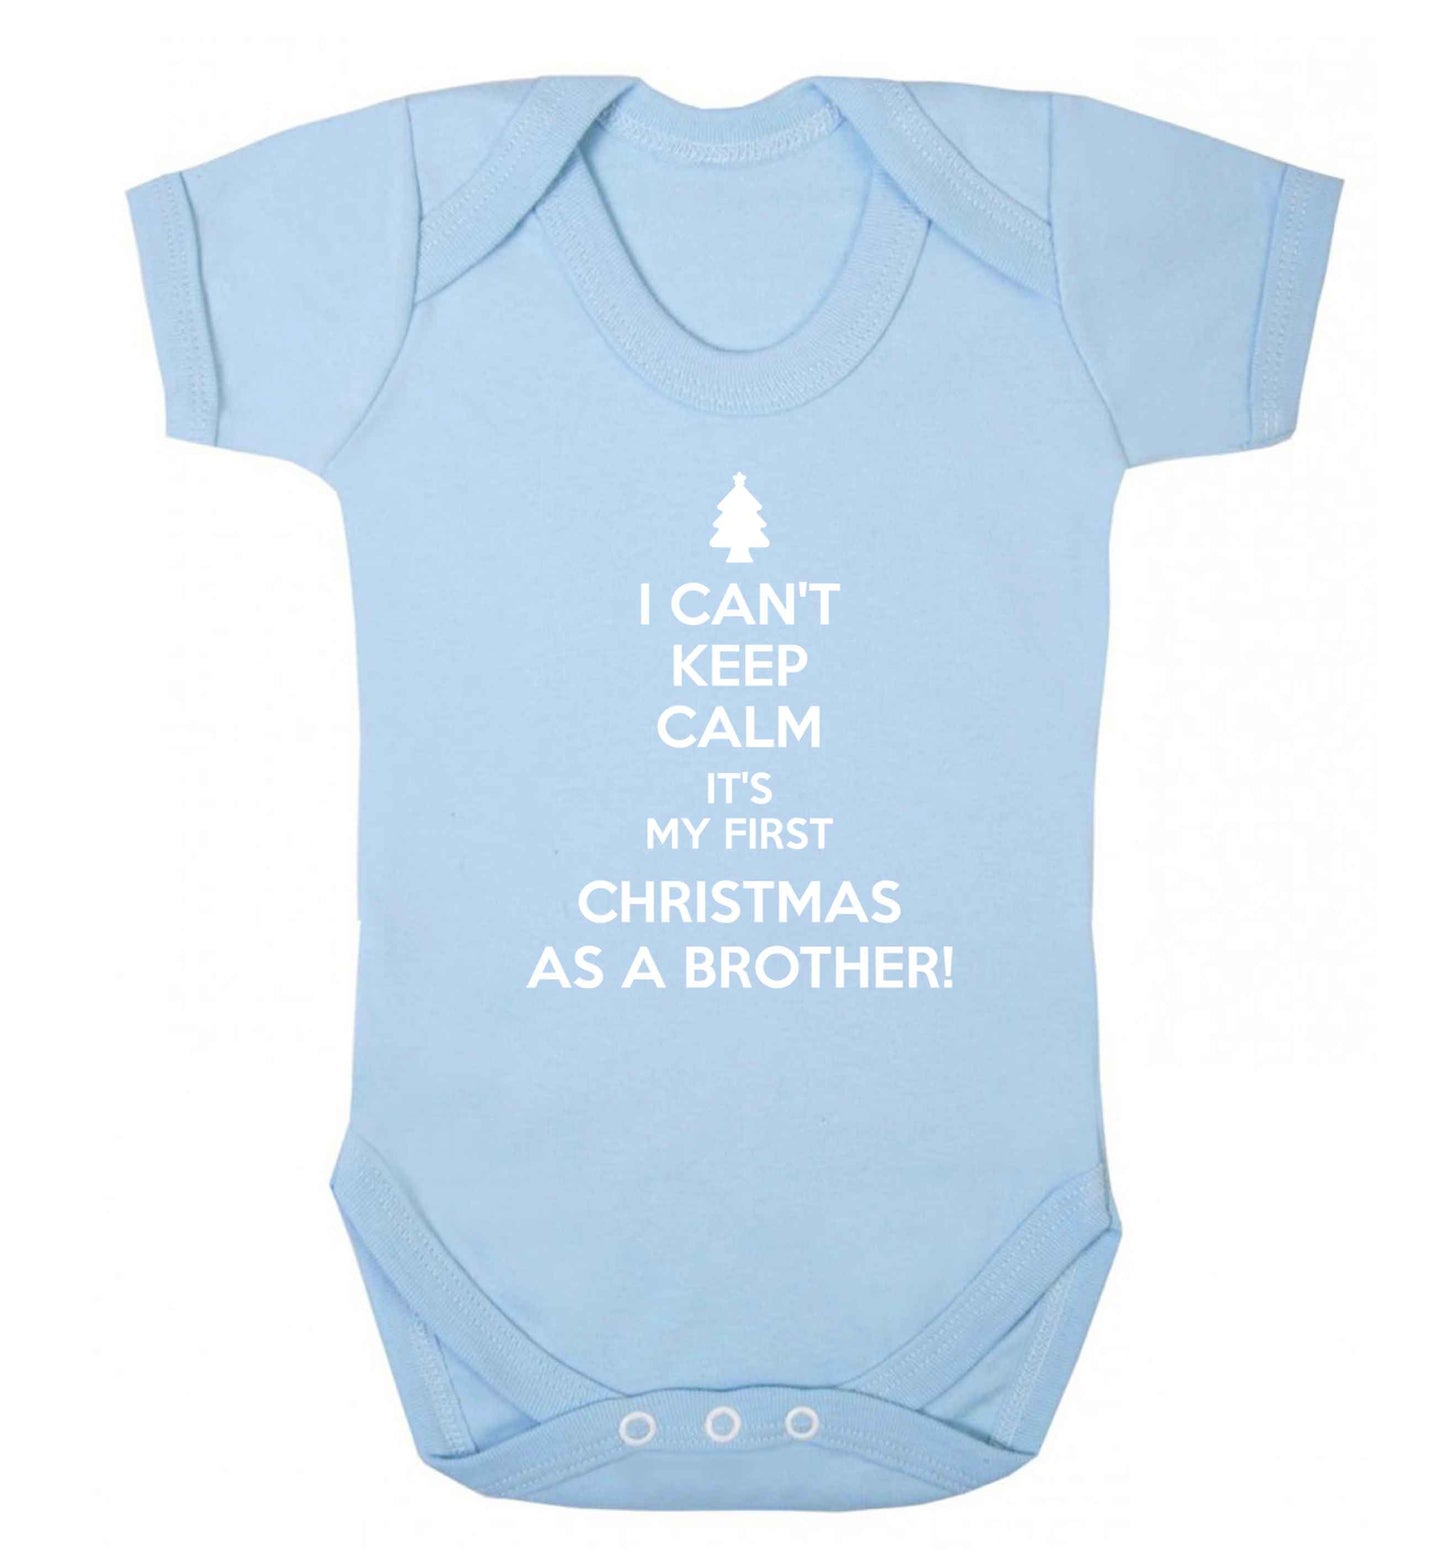 I can't keep calm it's my first Christmas as a brother! Baby Vest pale blue 18-24 months